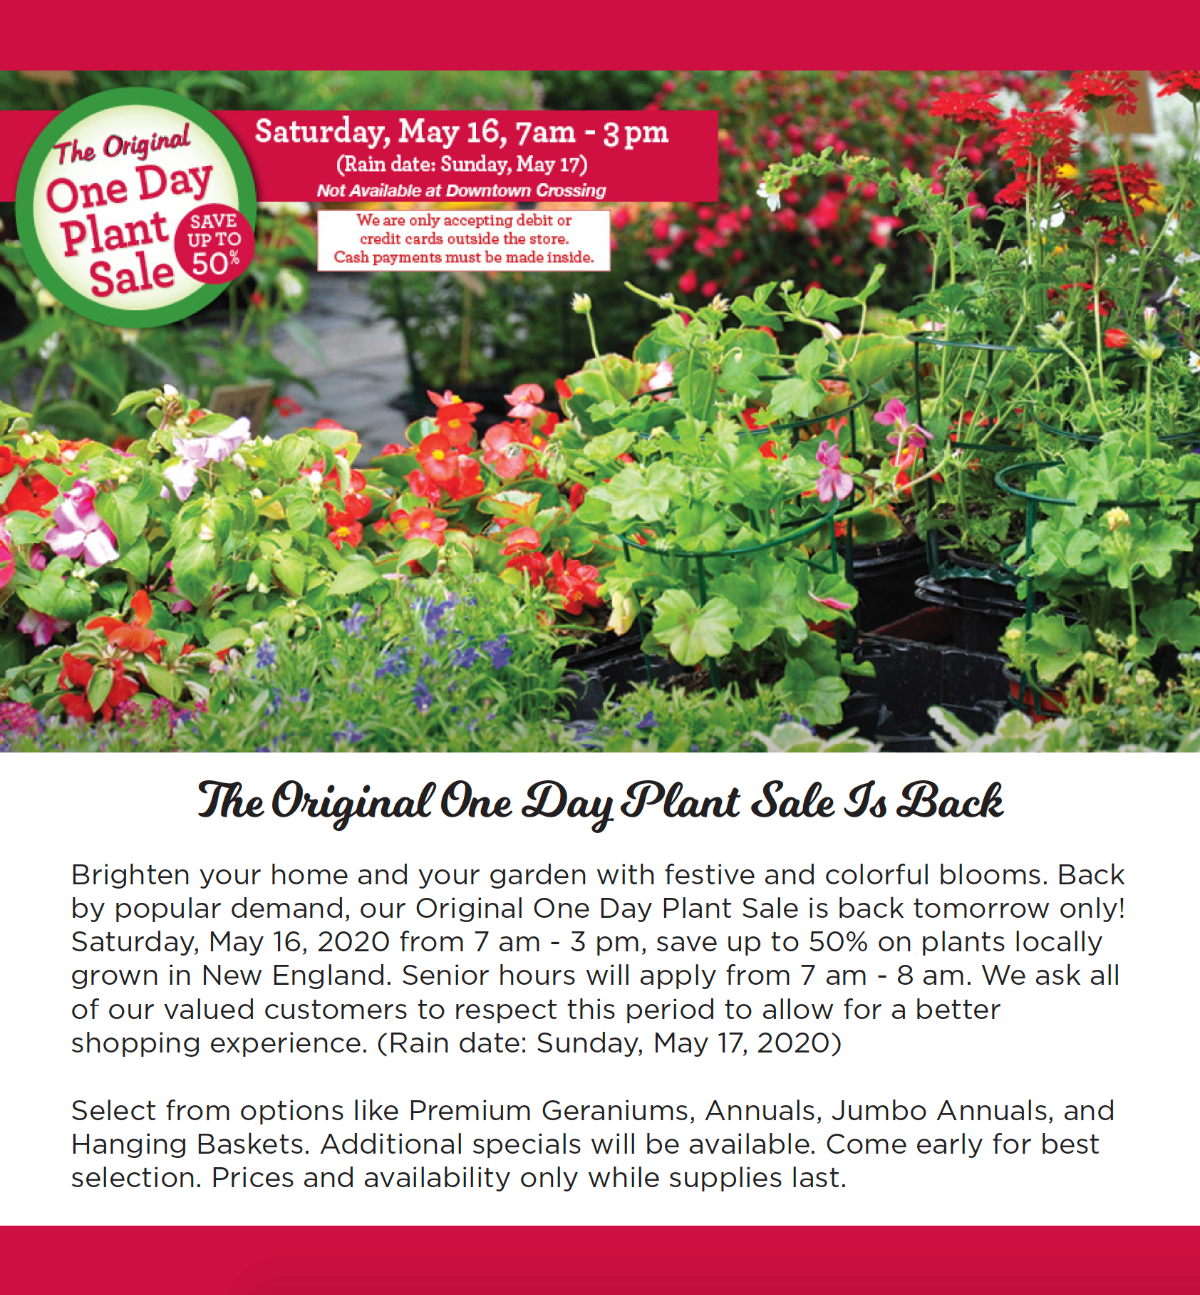 The Original One Day Plant Sale Is Back. Brighten your home and your garden with festive and colorful blooms. Back by popular demand, our Original One Day Plant Sale is back tomorrow only! Saturday, May 16, 2020 from 7 am - 3 pm, save up to 50% on plants locally grown in New England. Senior hours will apply from 7 am - 8 am. We ask all of our valued customers to respect this period to allow for a better shopping experience. (Rain date: Sunday, May 17, 2020)  Select from options like Premium Geraniums, Annuals, Jumbo Annuals, and Hanging Baskets. Additional specials will be available. Come early for best  selection. Prices and availability only while supplies last.